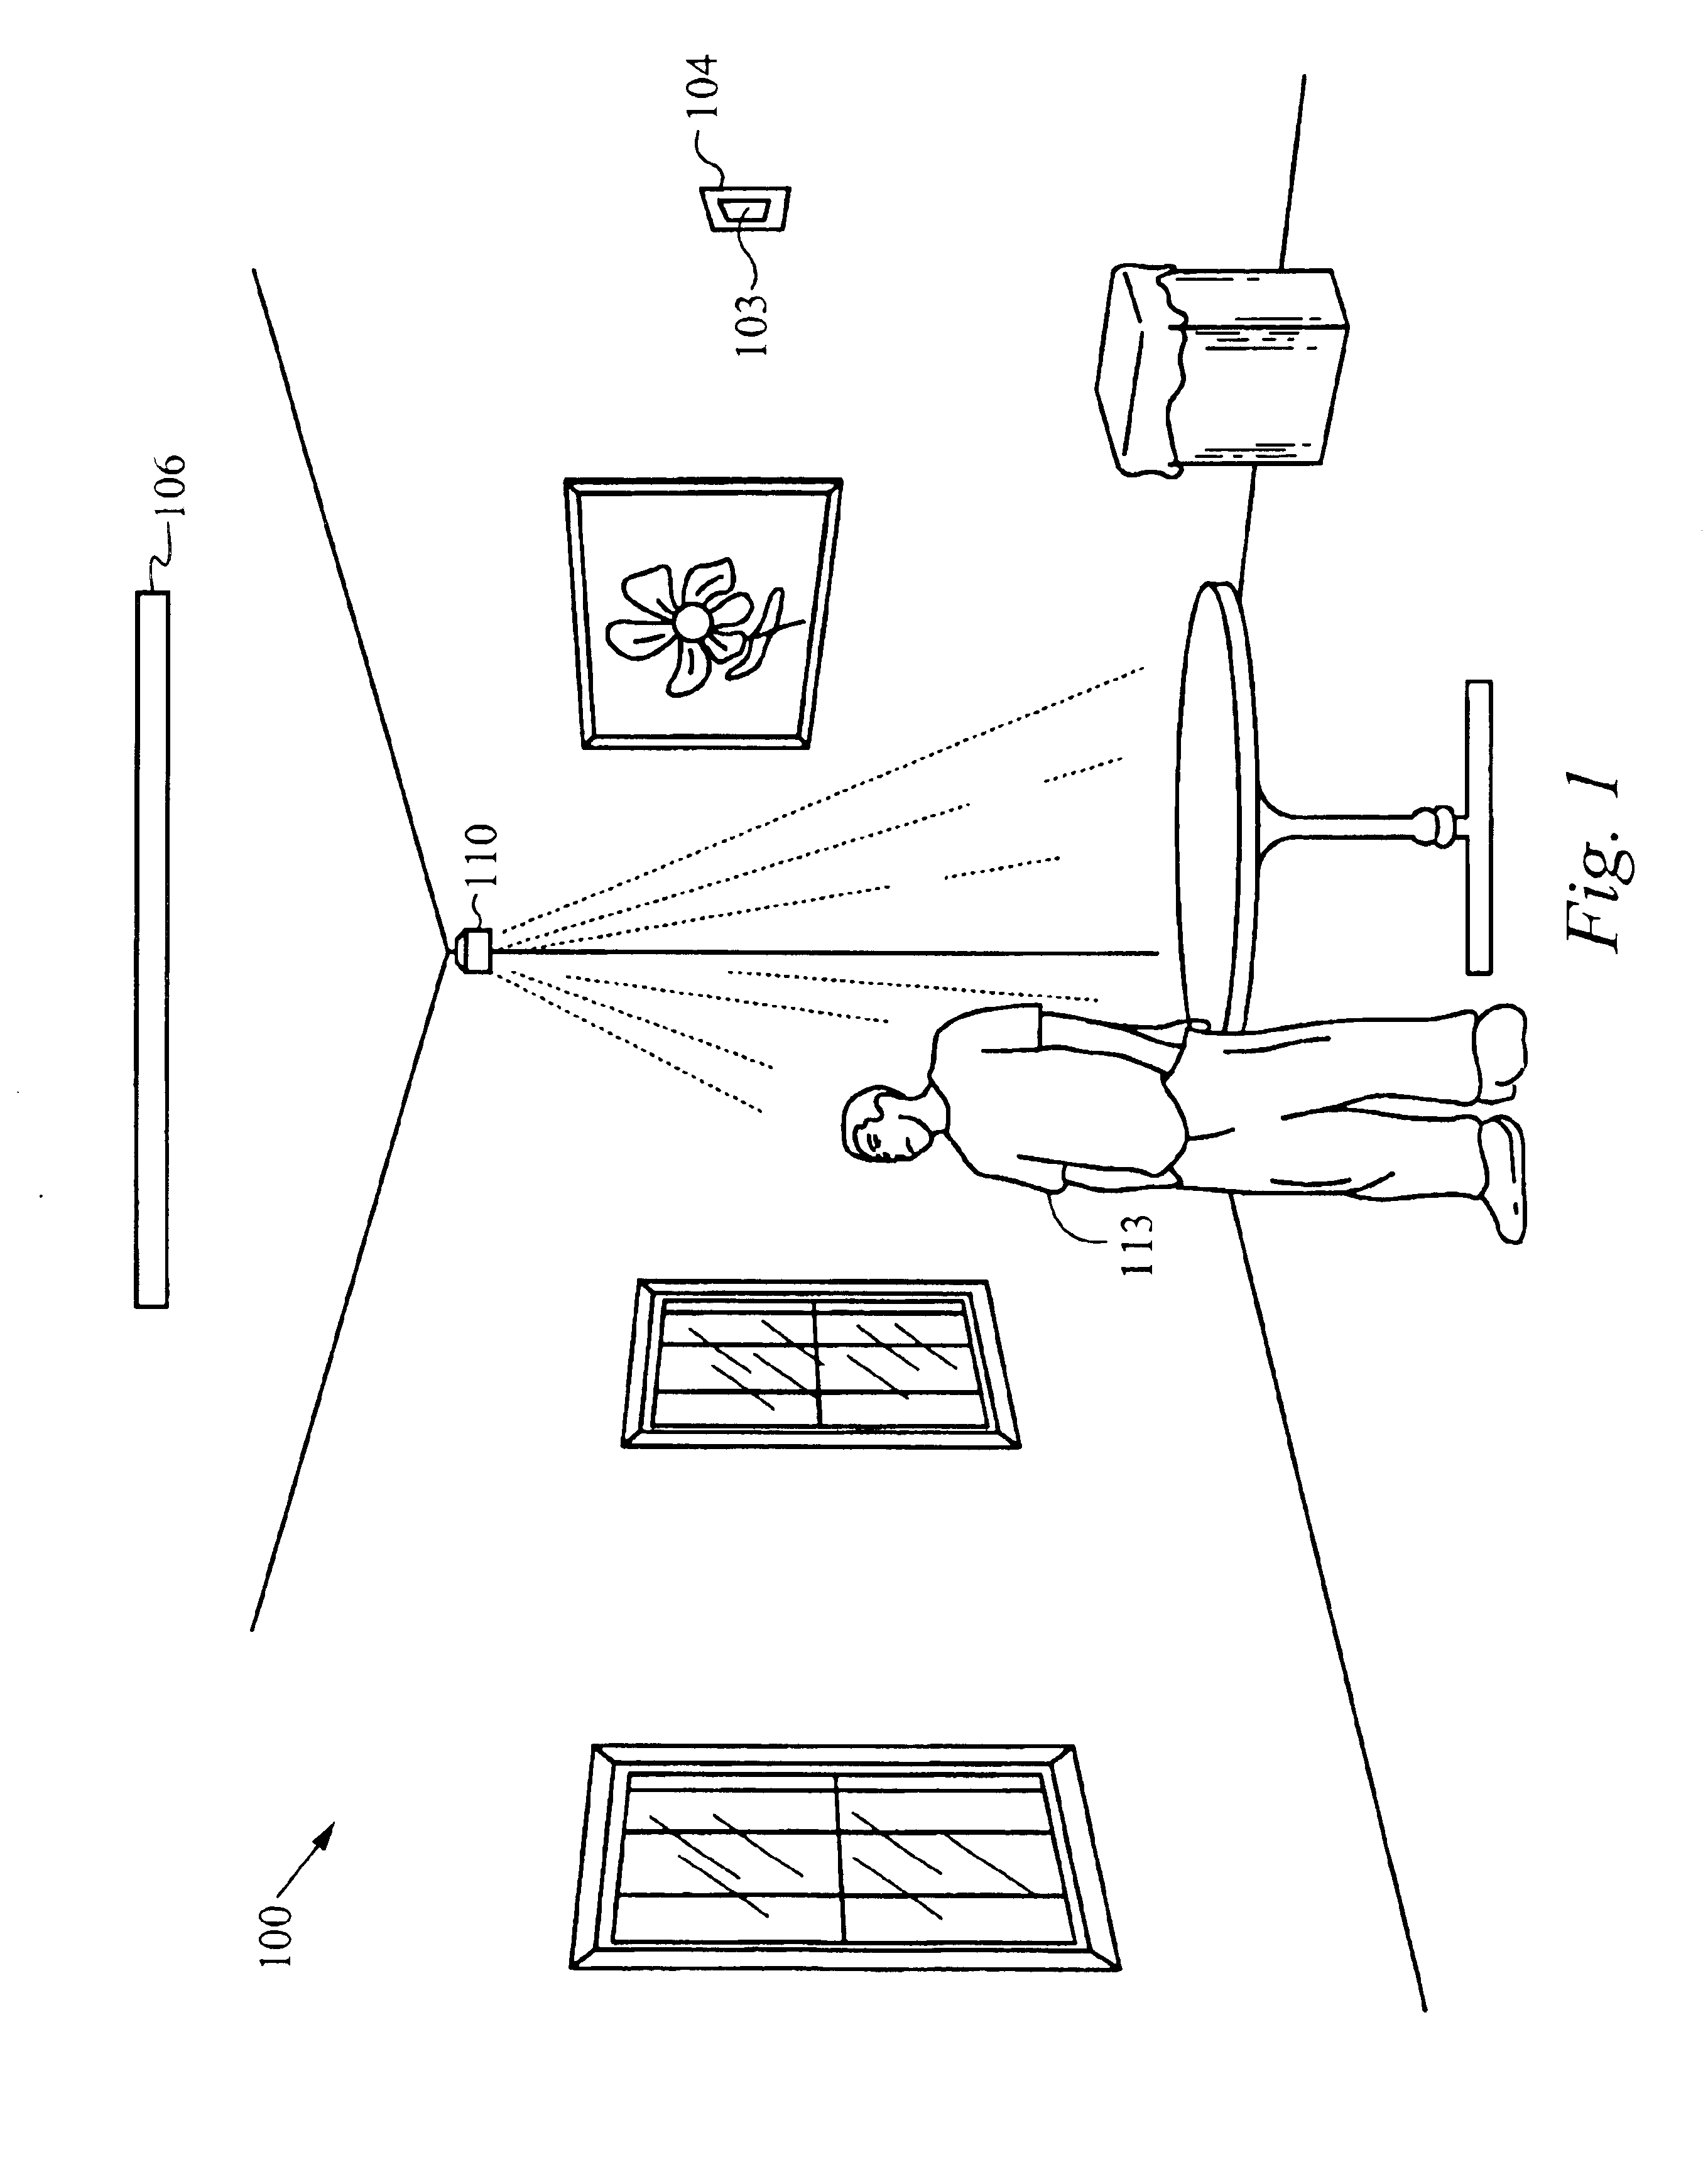 Light management system device and method